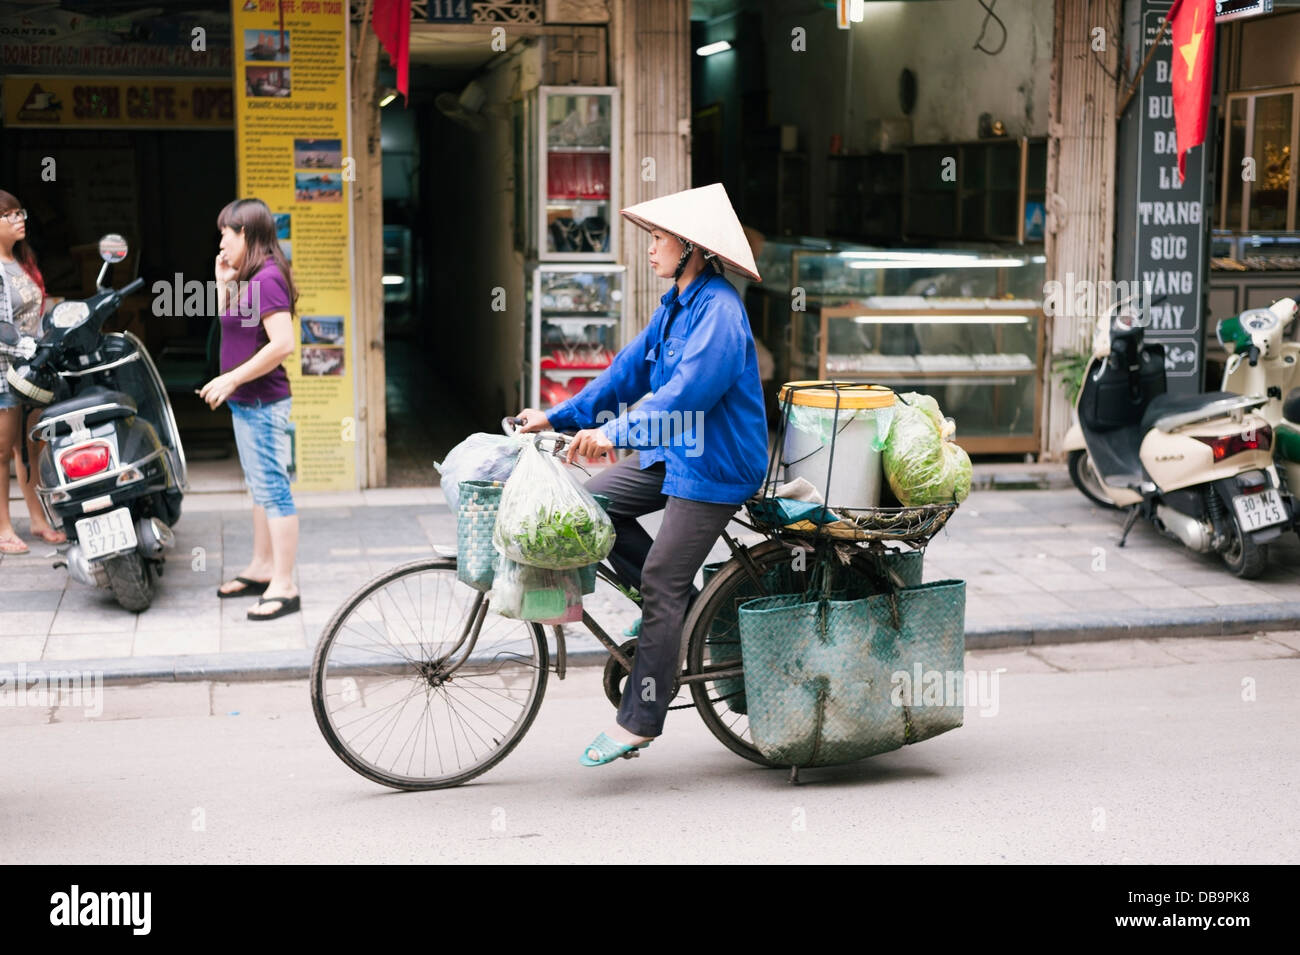 Hanoi, Vietnam - street vendor on a bicycle in the Old Quarter Stock Photo